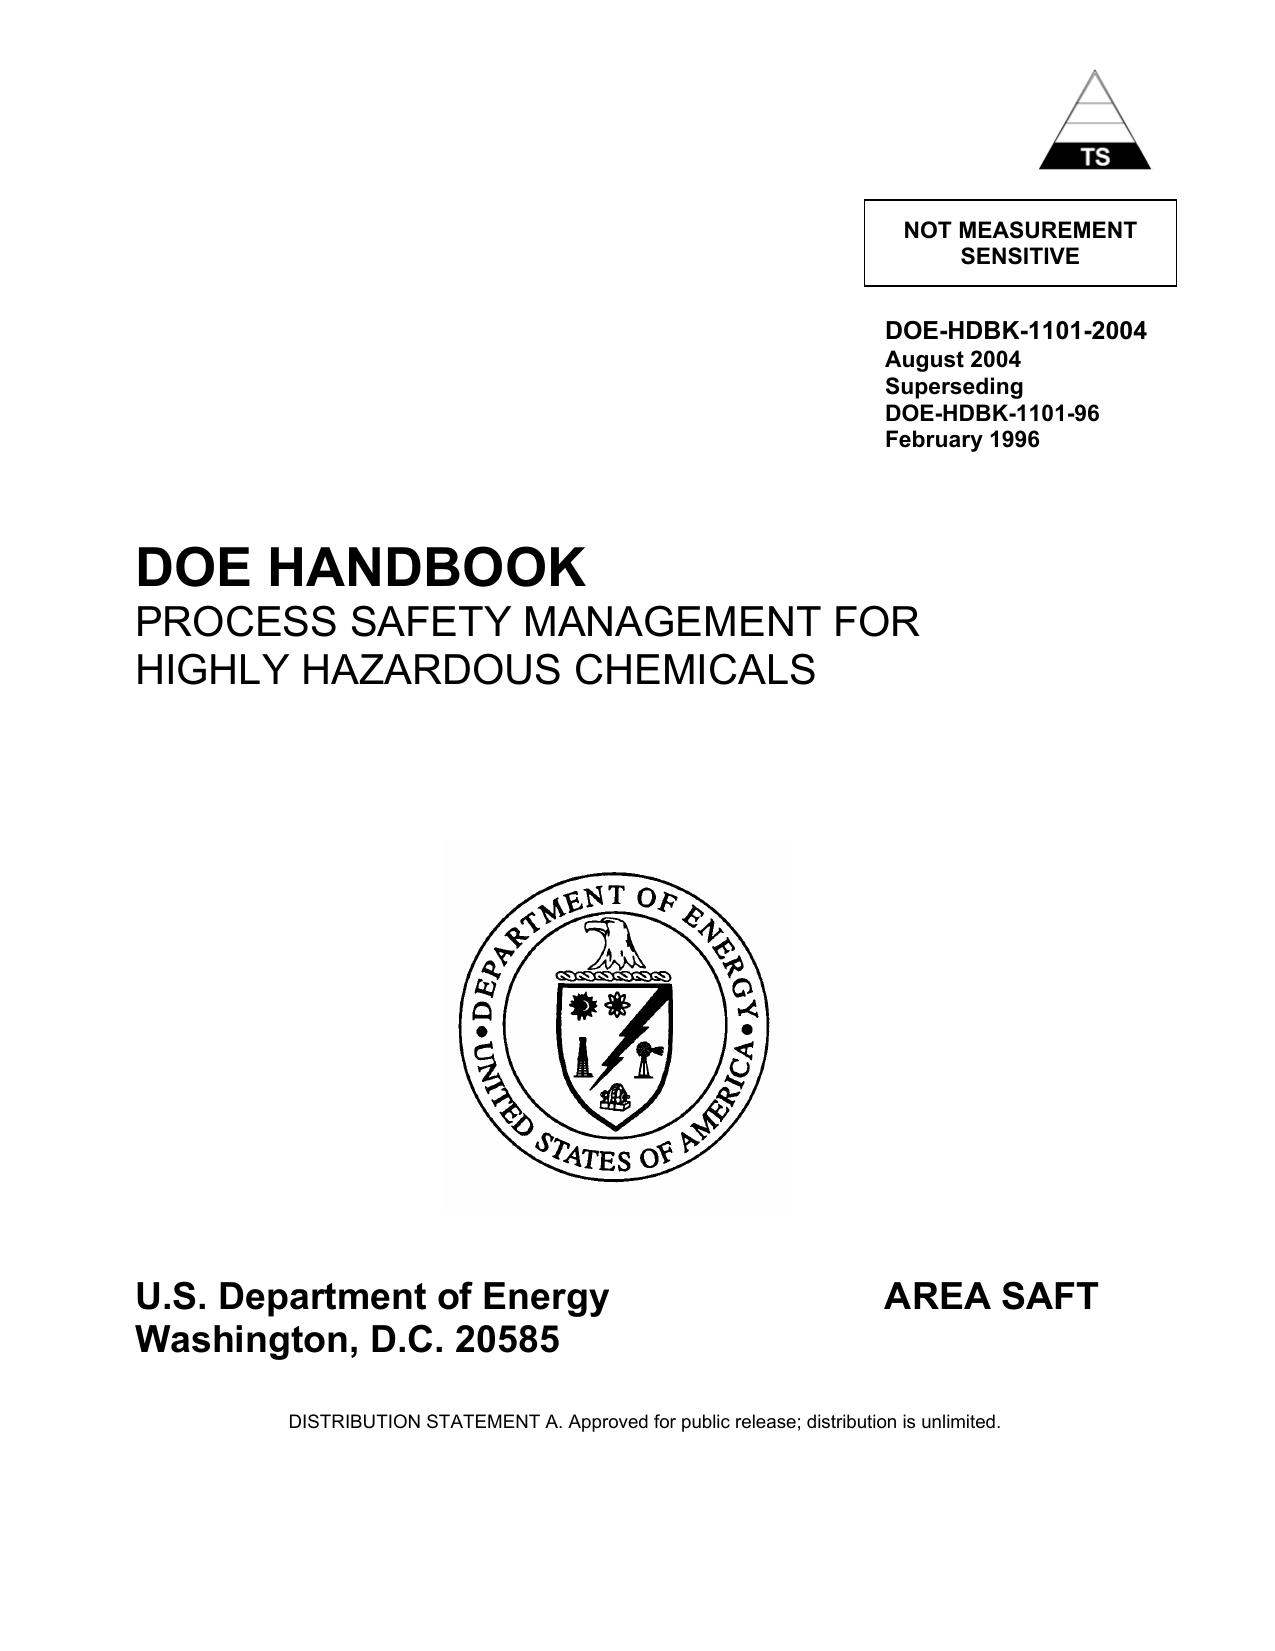 DOE-HDBK-1101-2004; Process Safety Management for Highly Hazardous Chemicals (DOE HDBK-1101-2004)